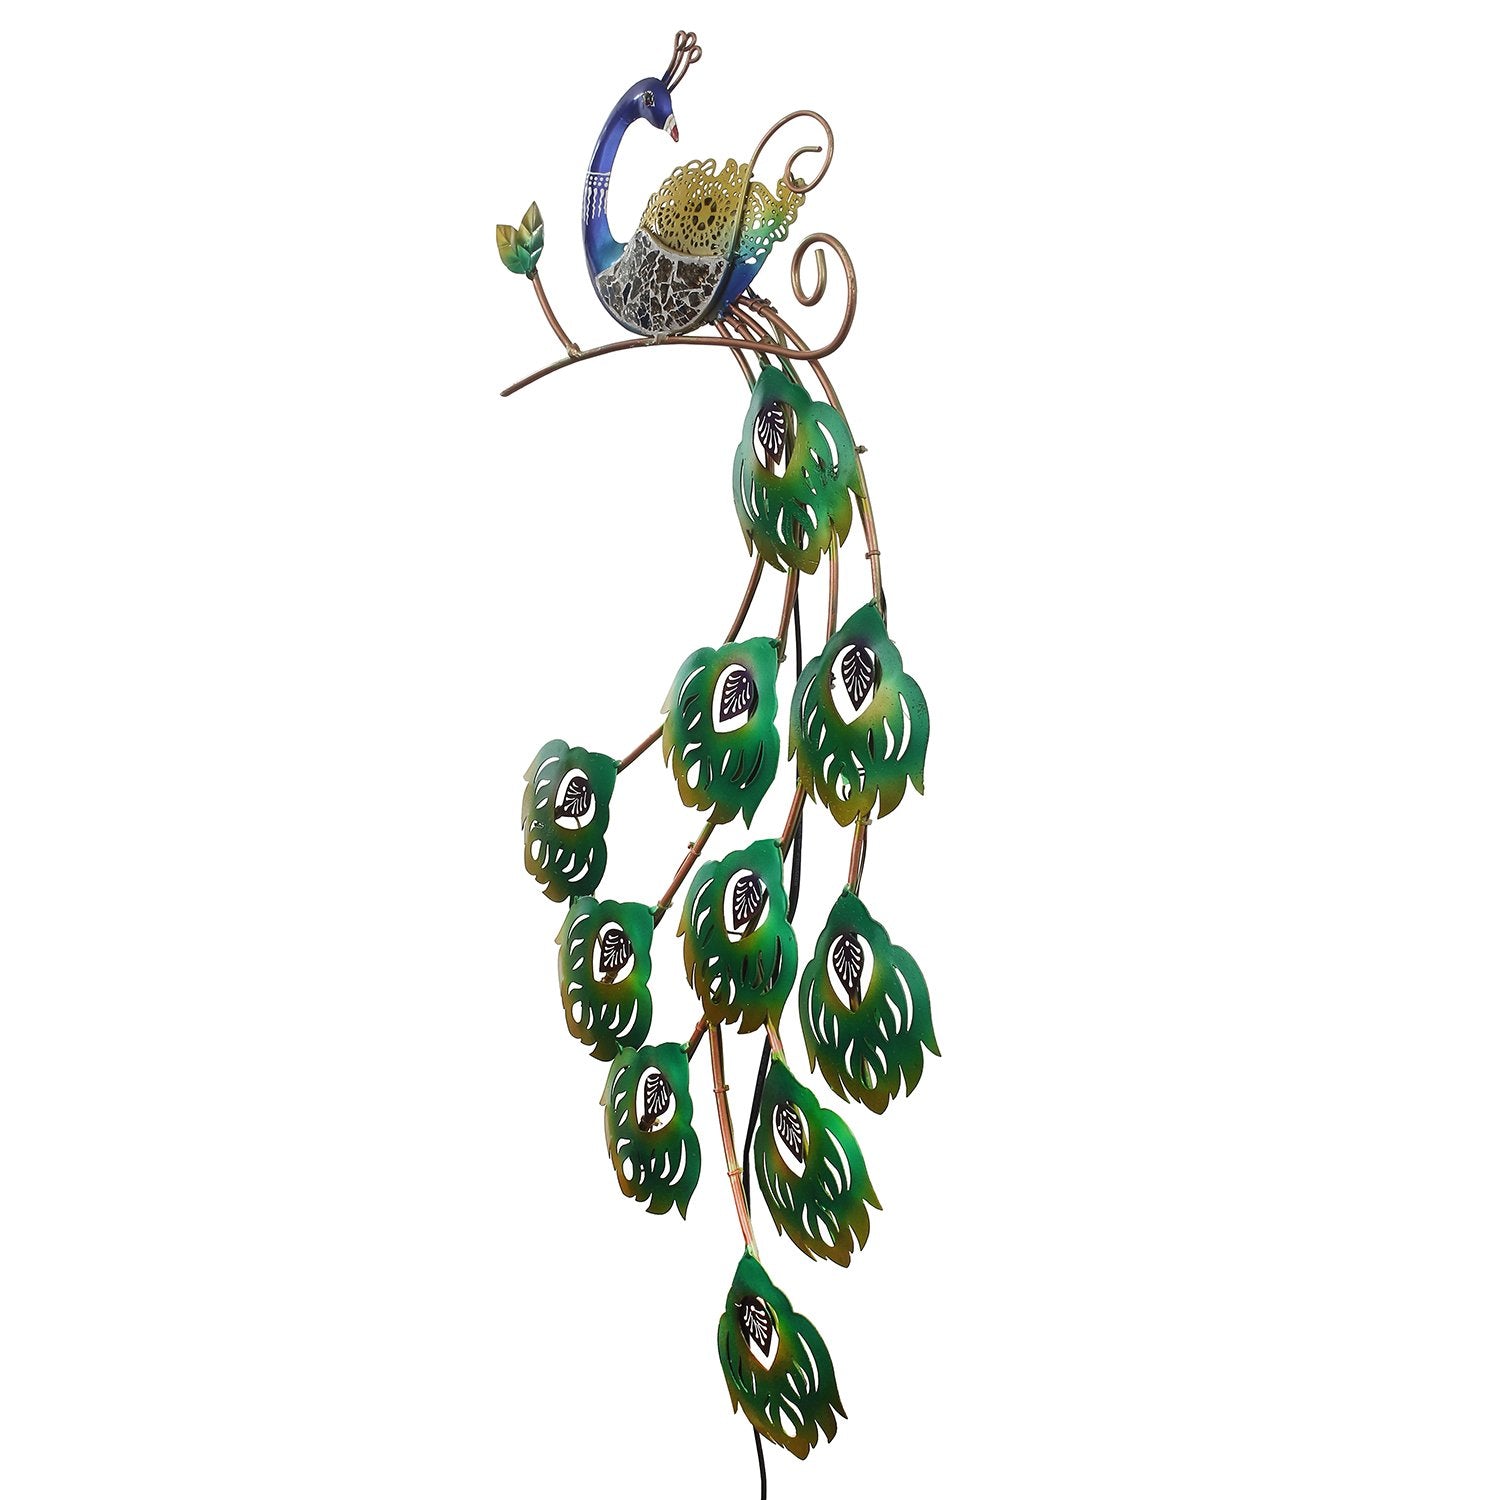 Colorful Dancing Peacock Handcrafted Iron Wall Hanging with background LED's (Blue, Green and Golden) 5